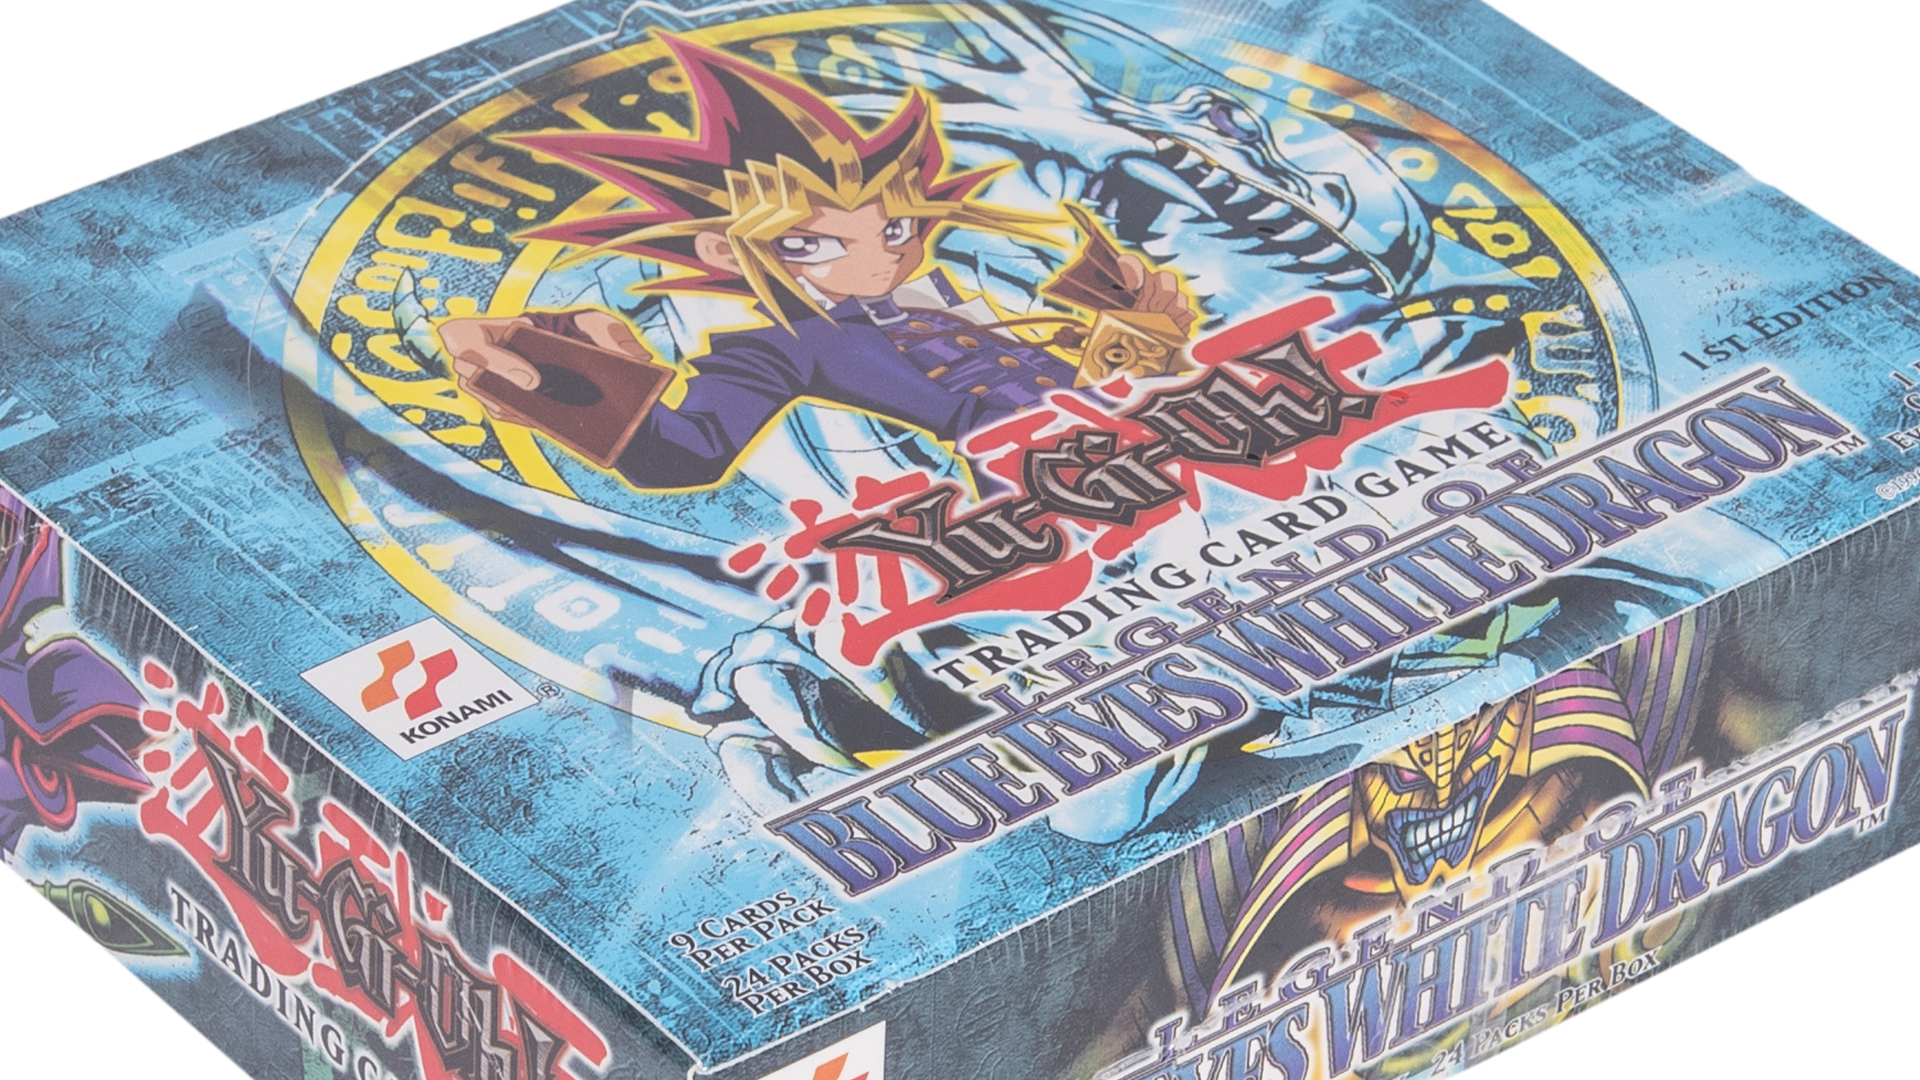 Stock in US YUGIOH CARDS Legend of Blue Eyes White Dragon LOB-K Booster Box 